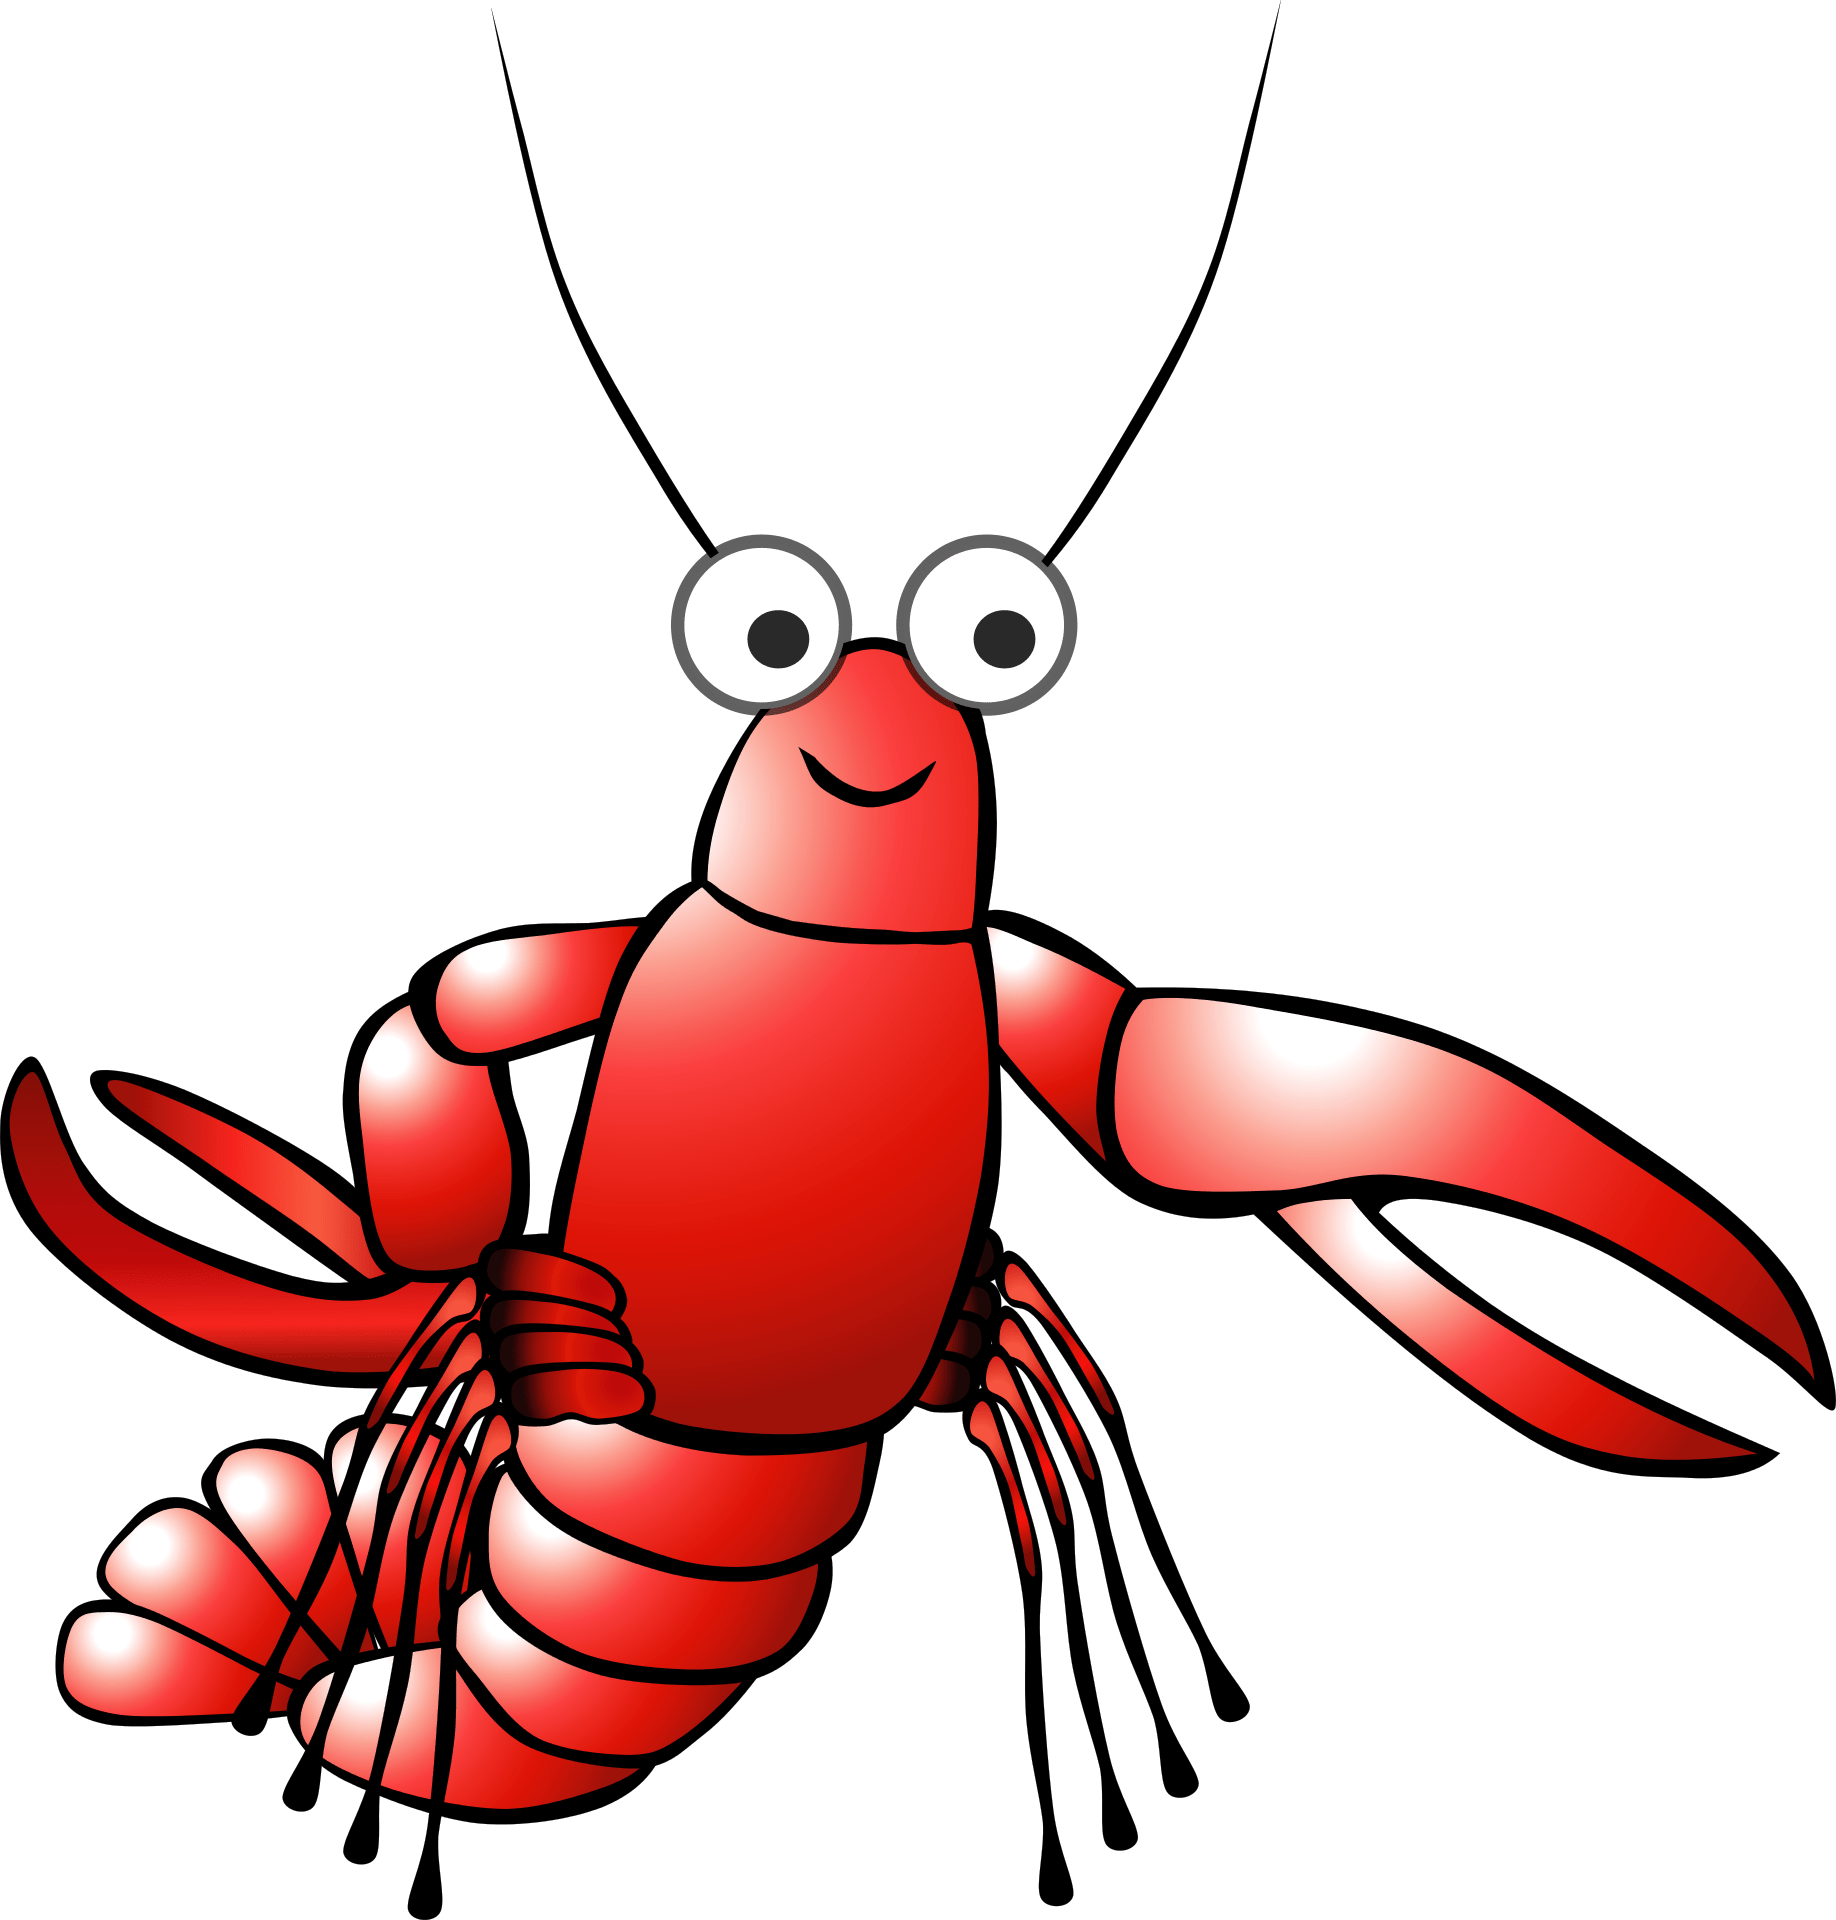 Larry ang lobster Pic Pic